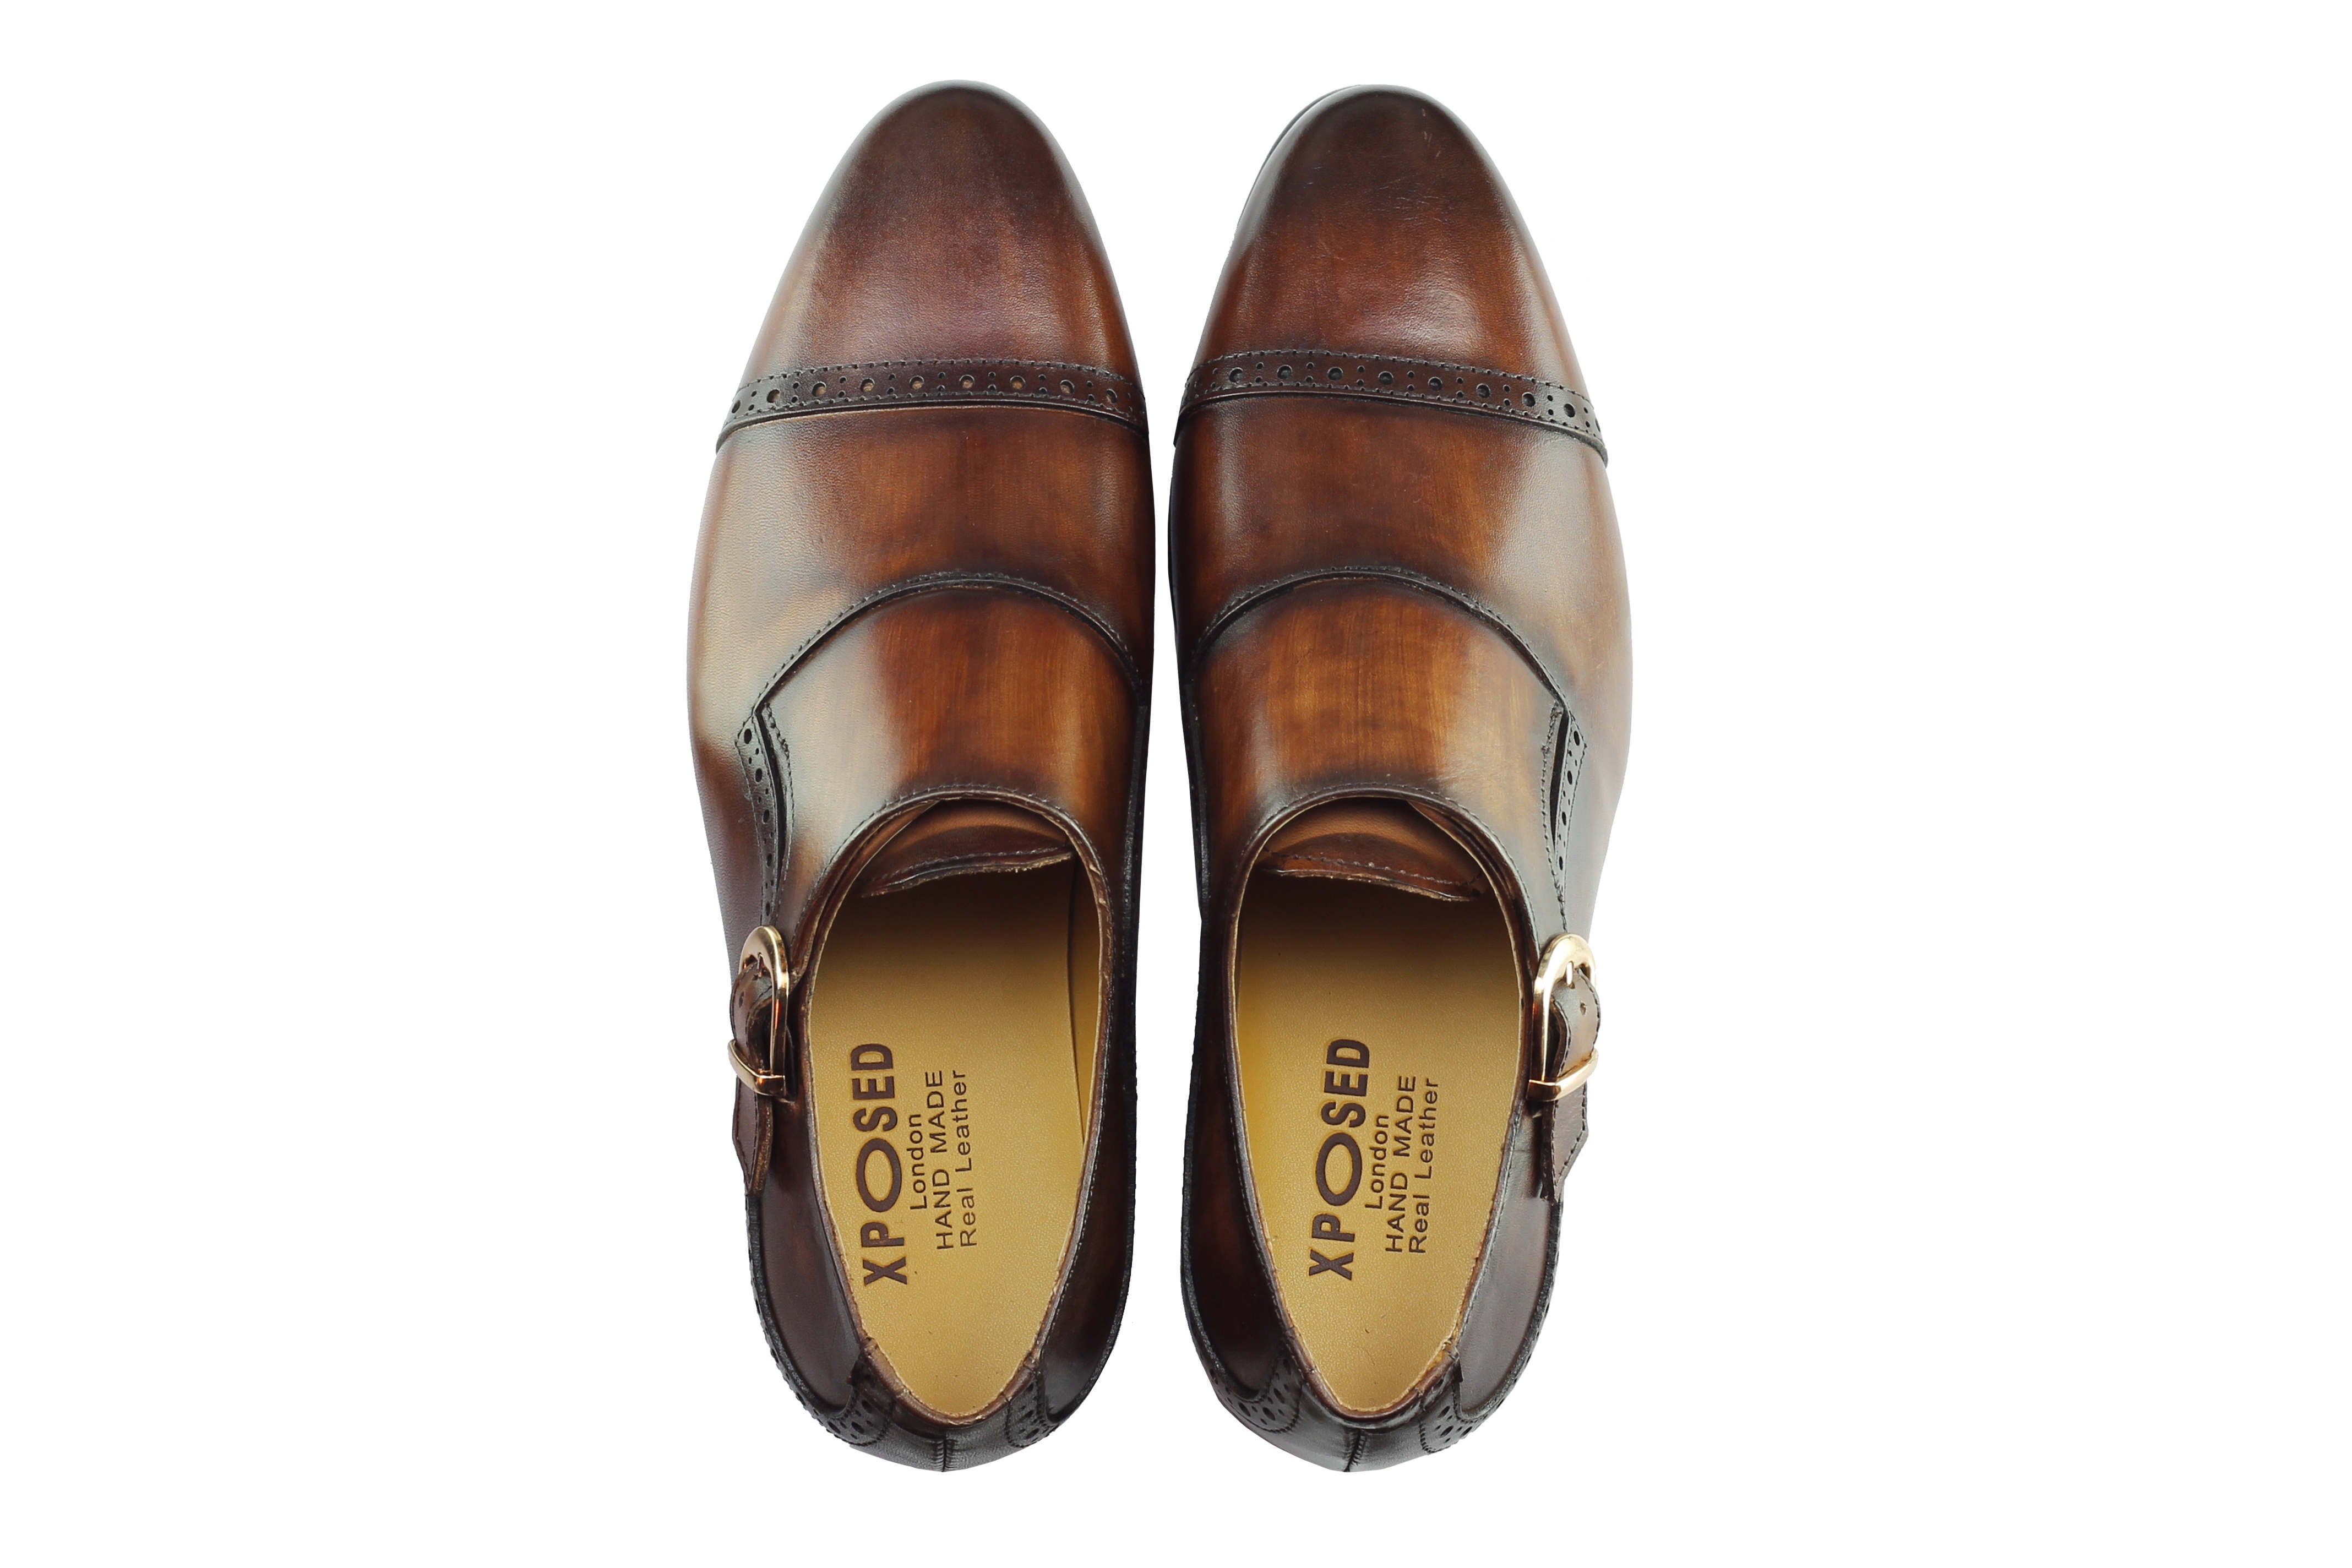 Real Leather Monk Strap Brown Loafer